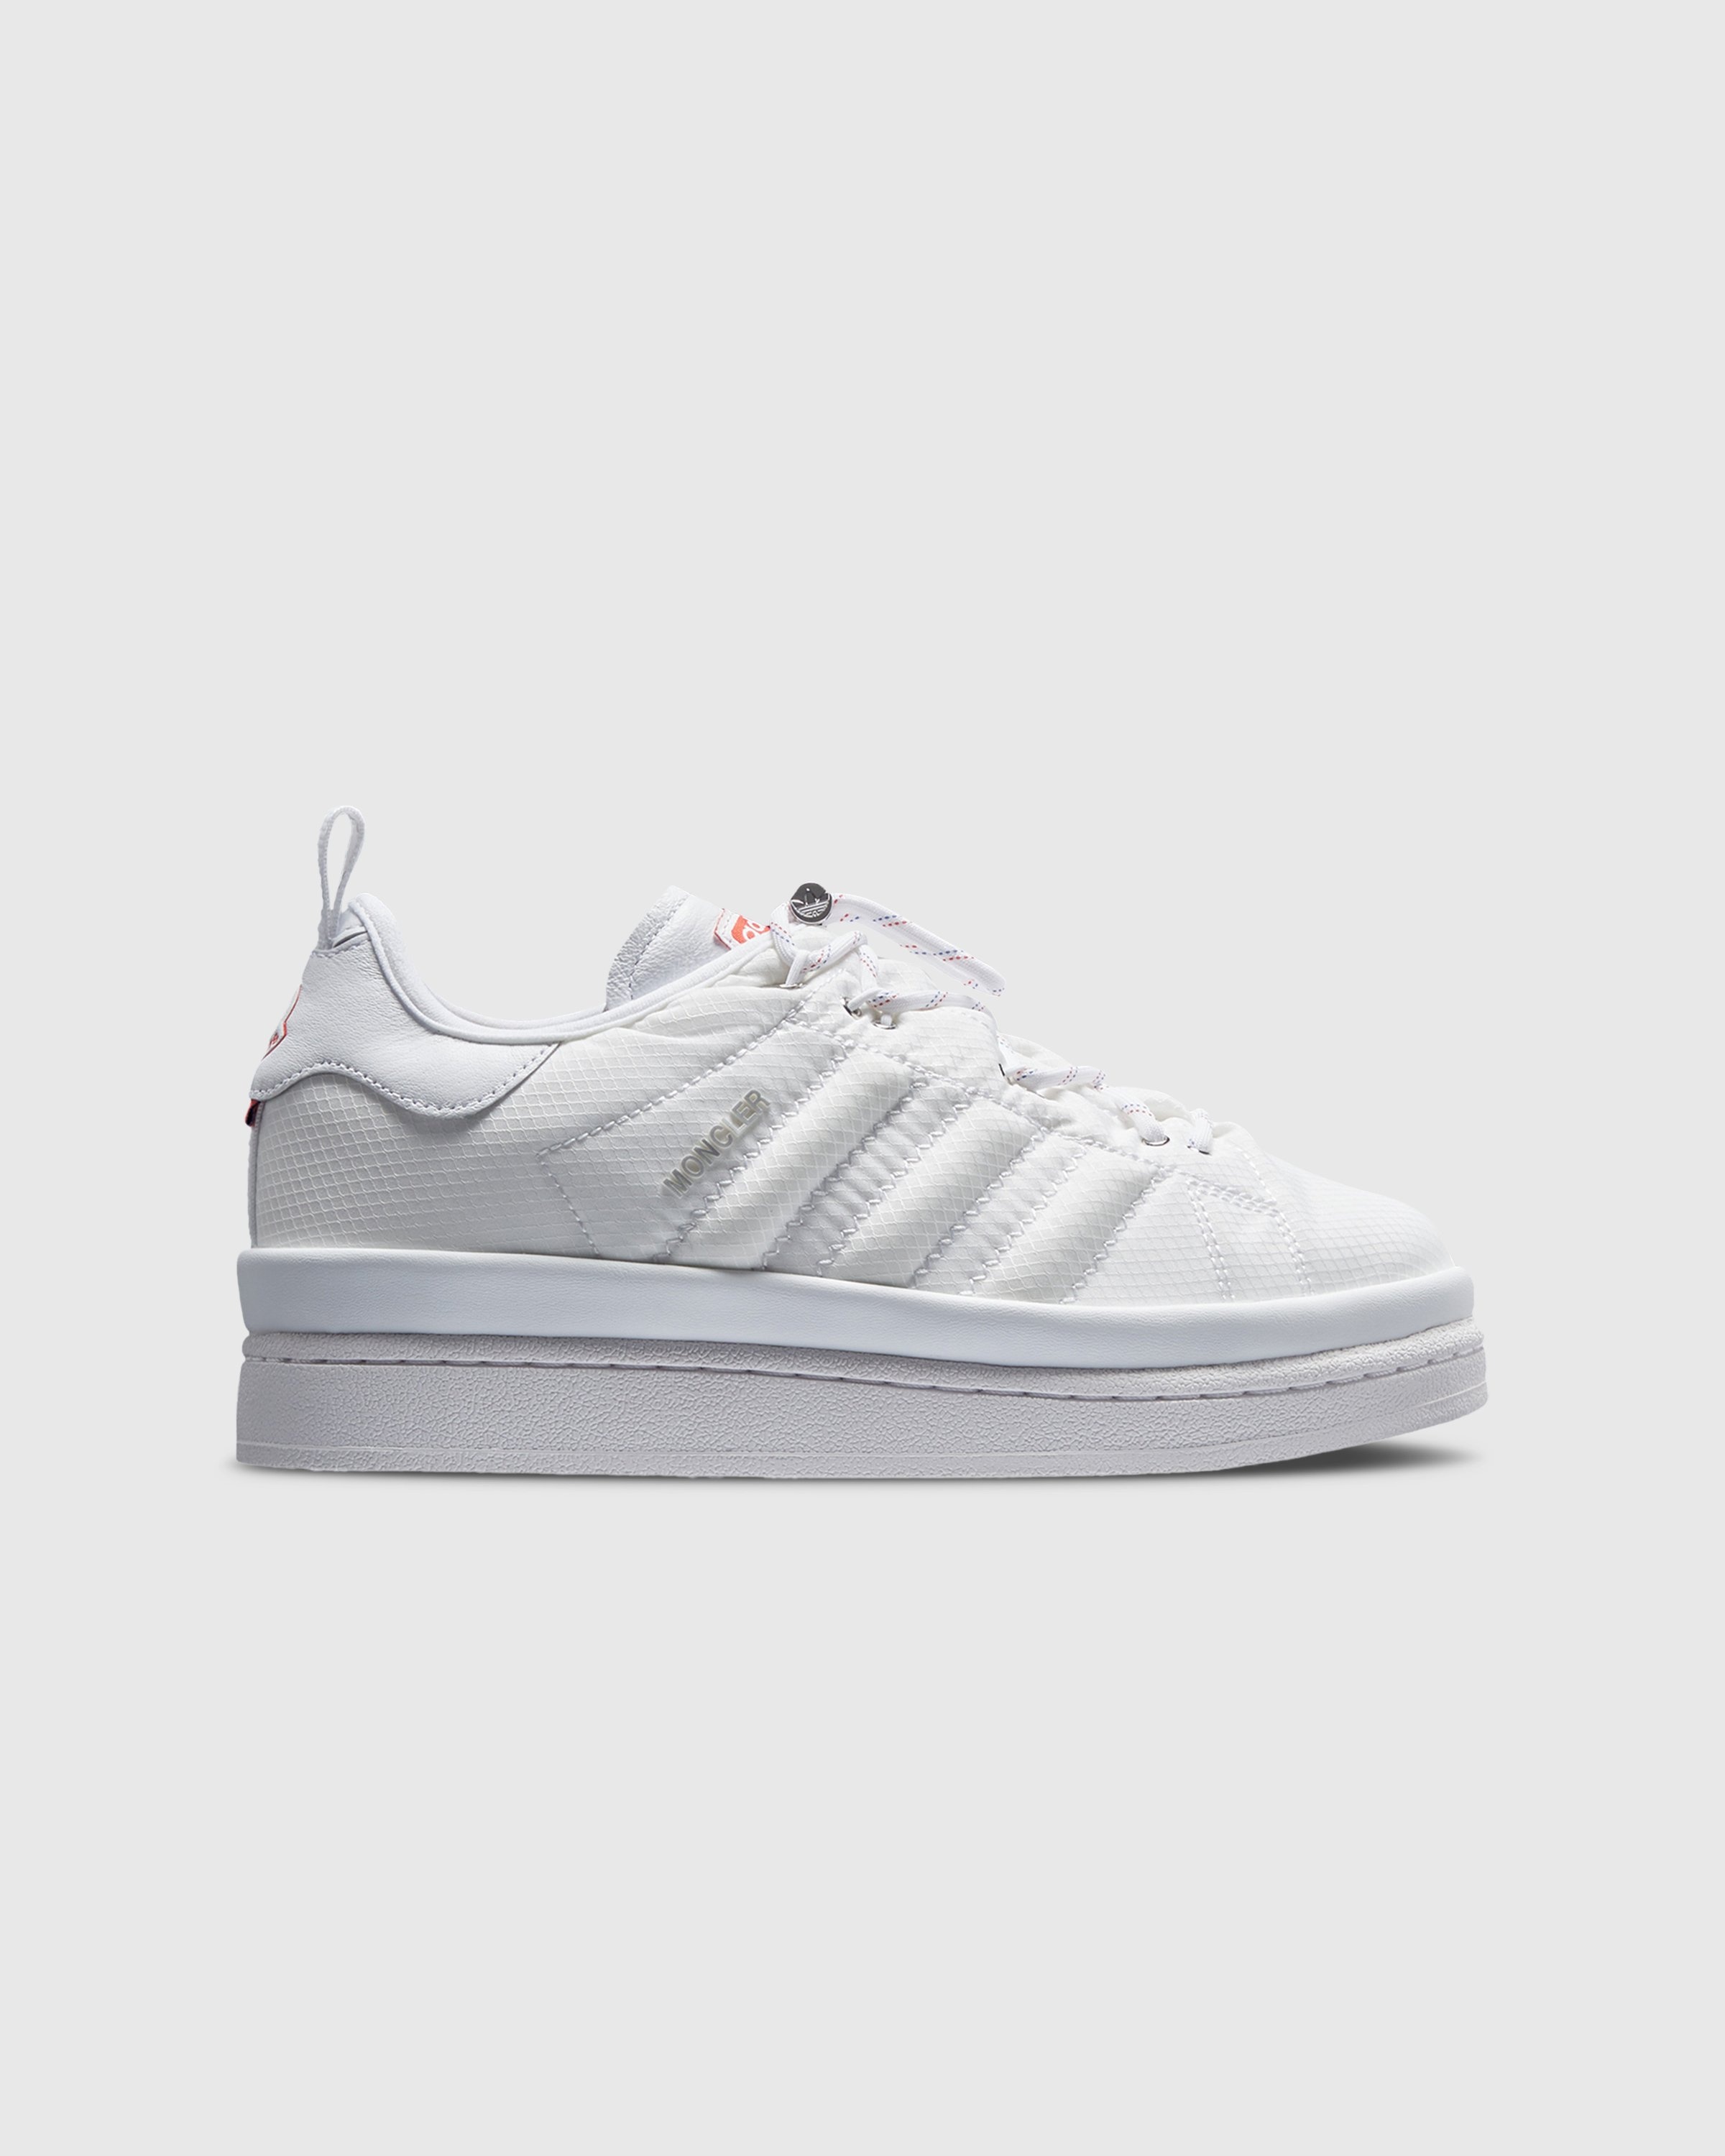 Moncler x adidas Originals – Campus Shoes Core White  - Sneakers - White - Image 1